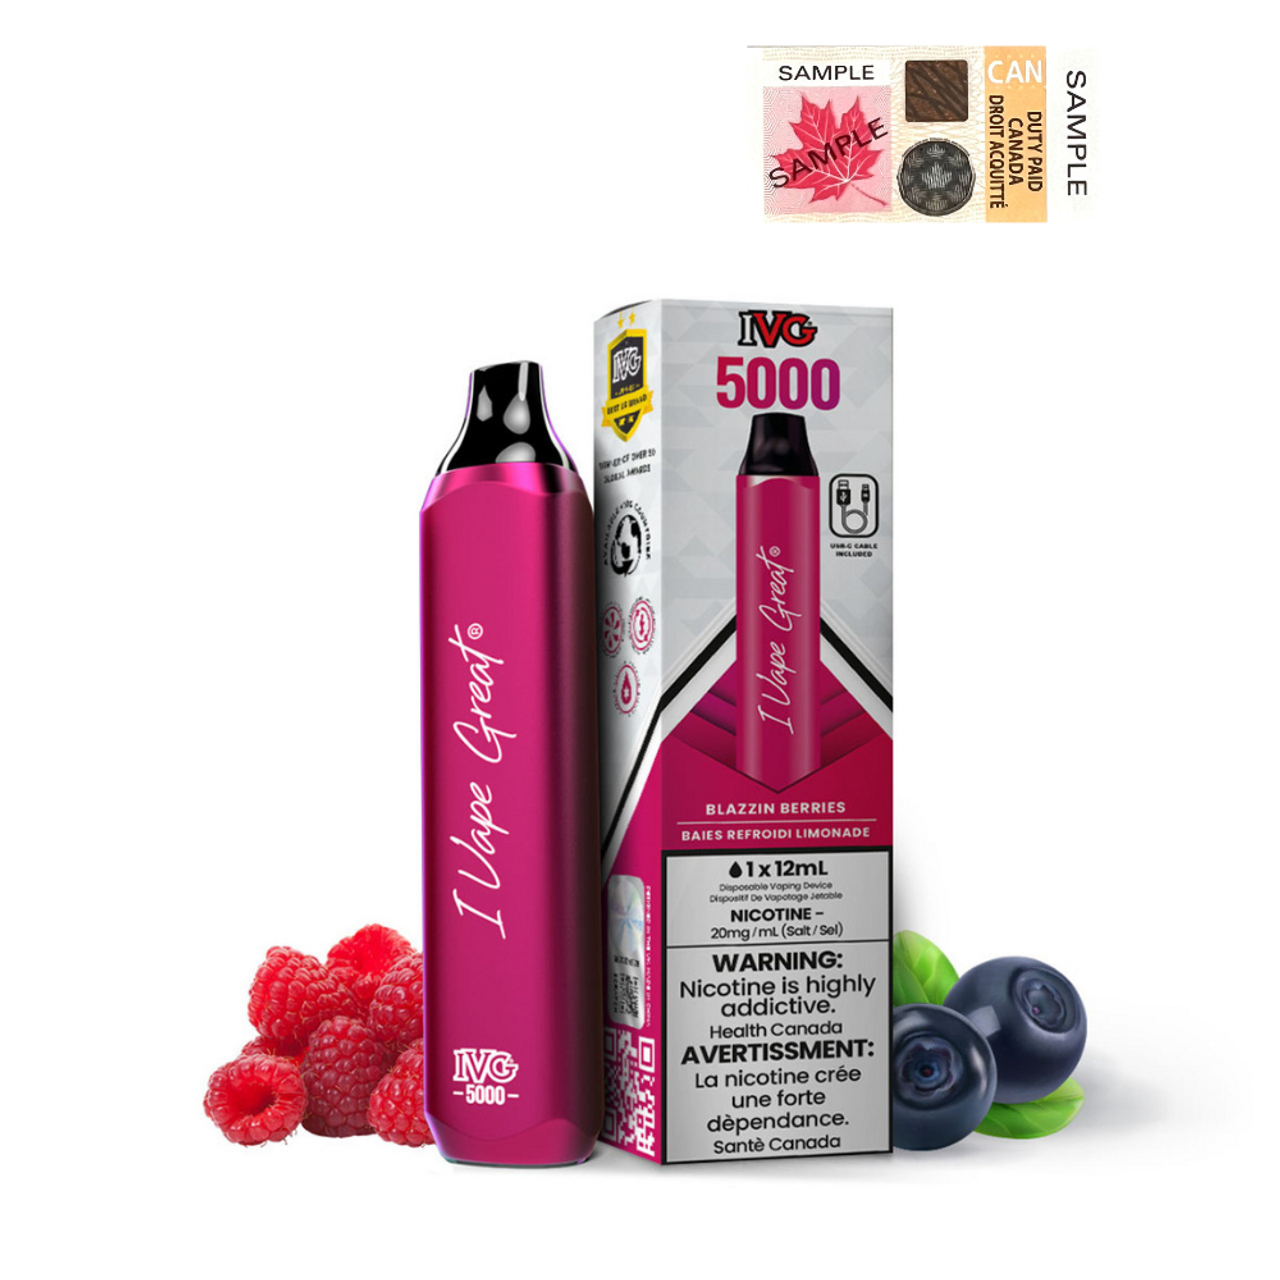 (Stamped) Blazzin Berries IVG Bar Max 5000 Puffs Disposable Vape Ct-6